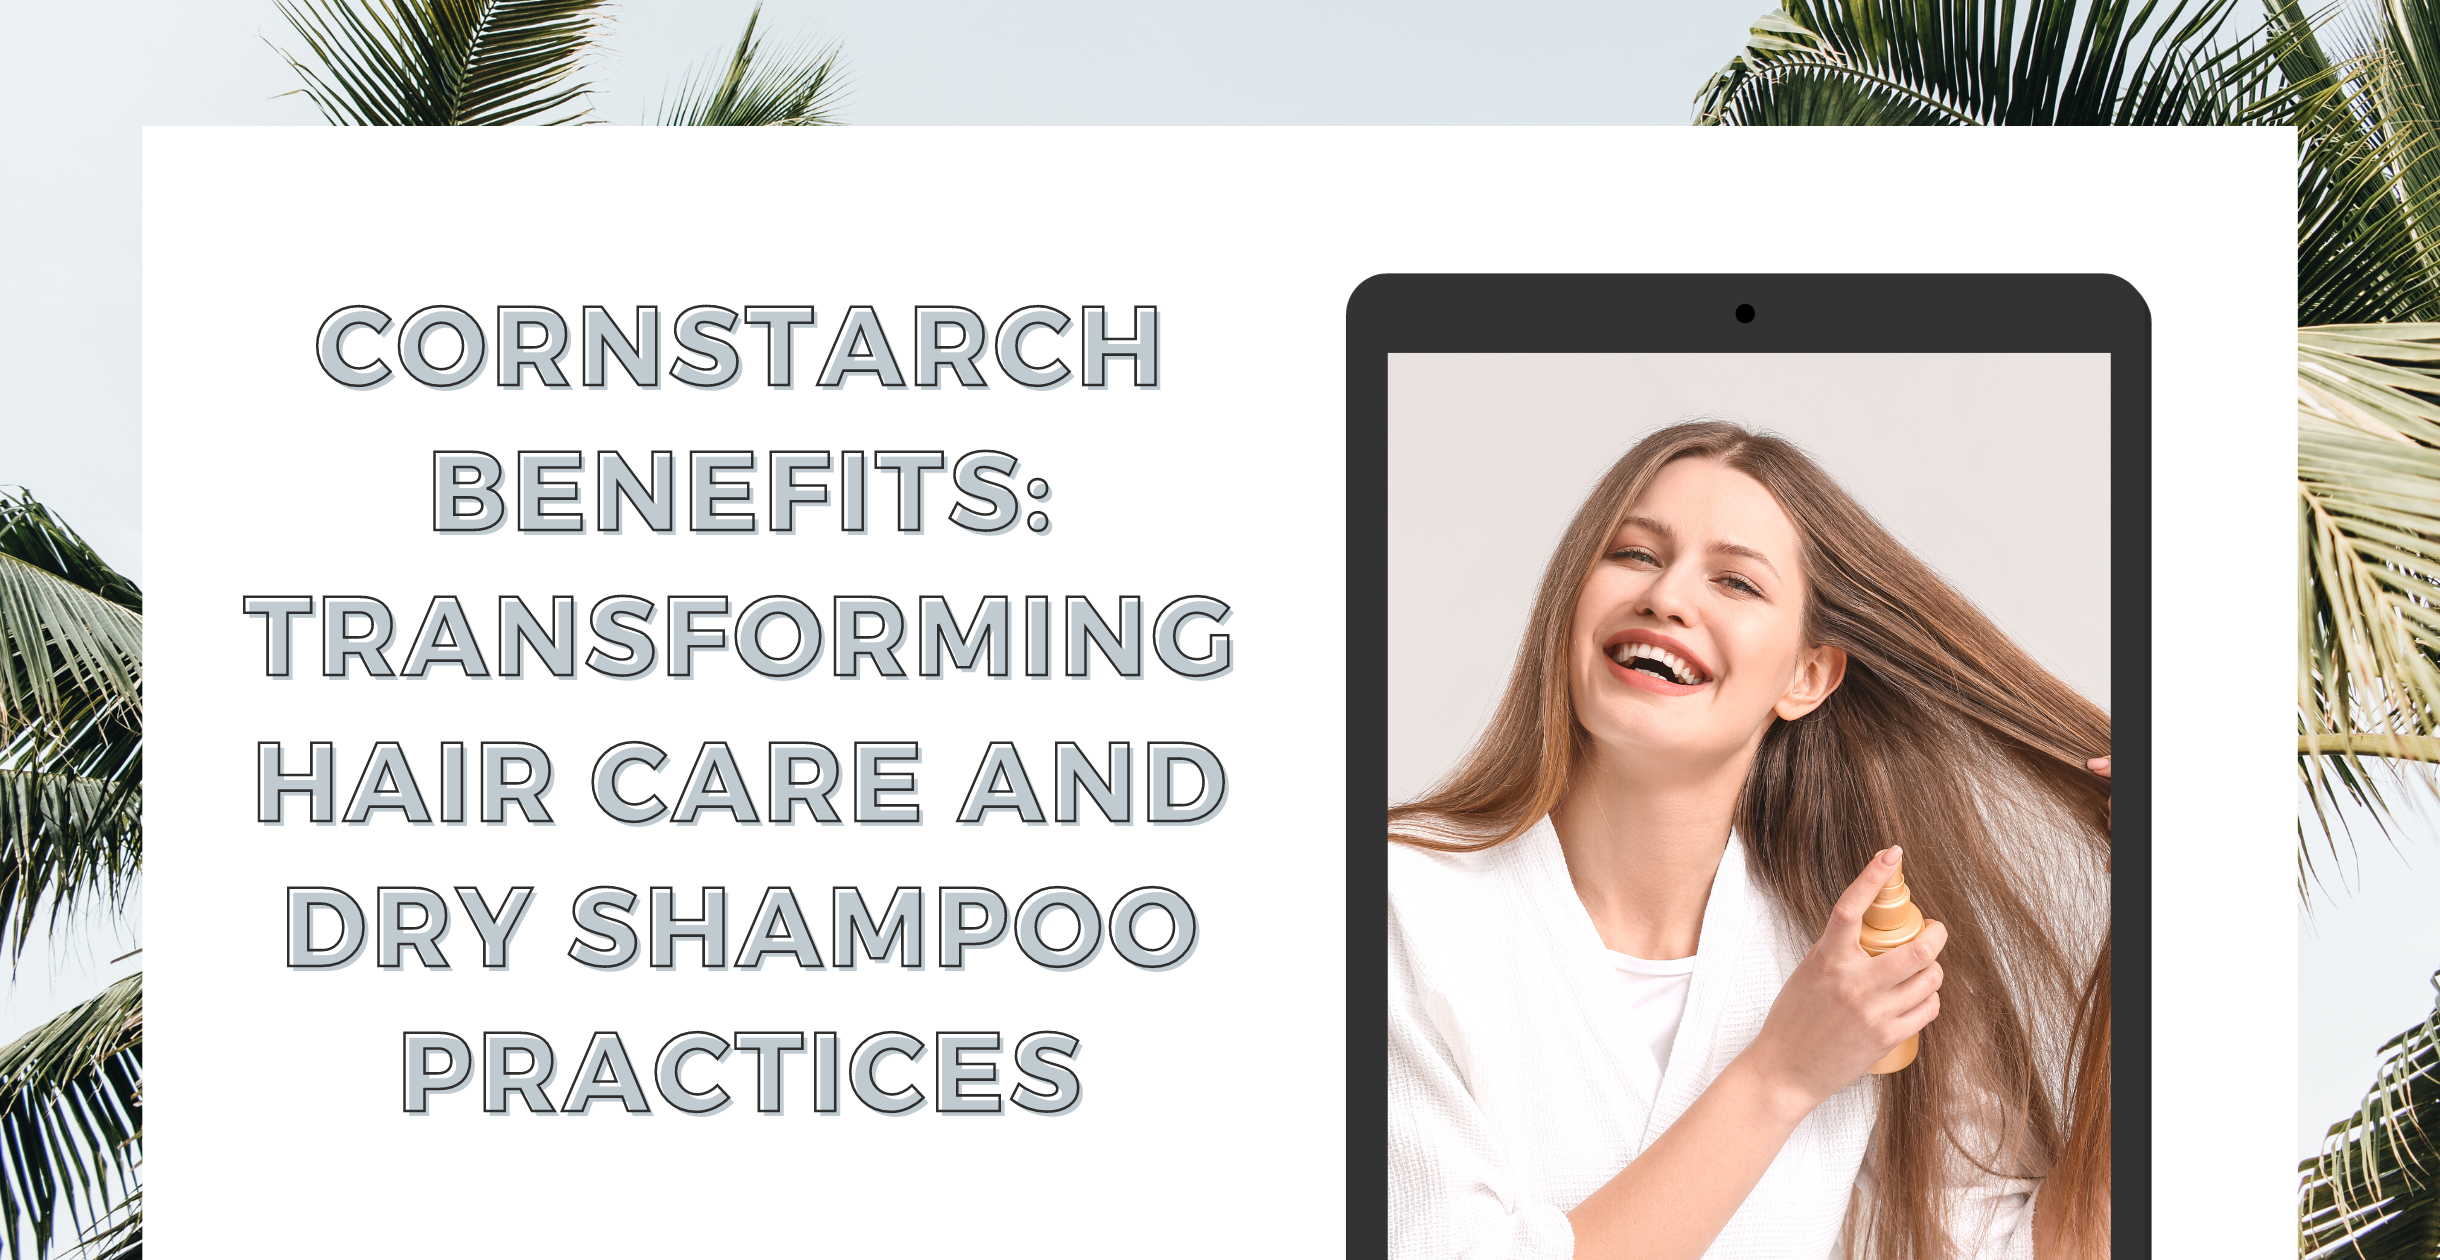 Cornstarch Benefits: Transforming Hair Care and Dry Shampoo Practices